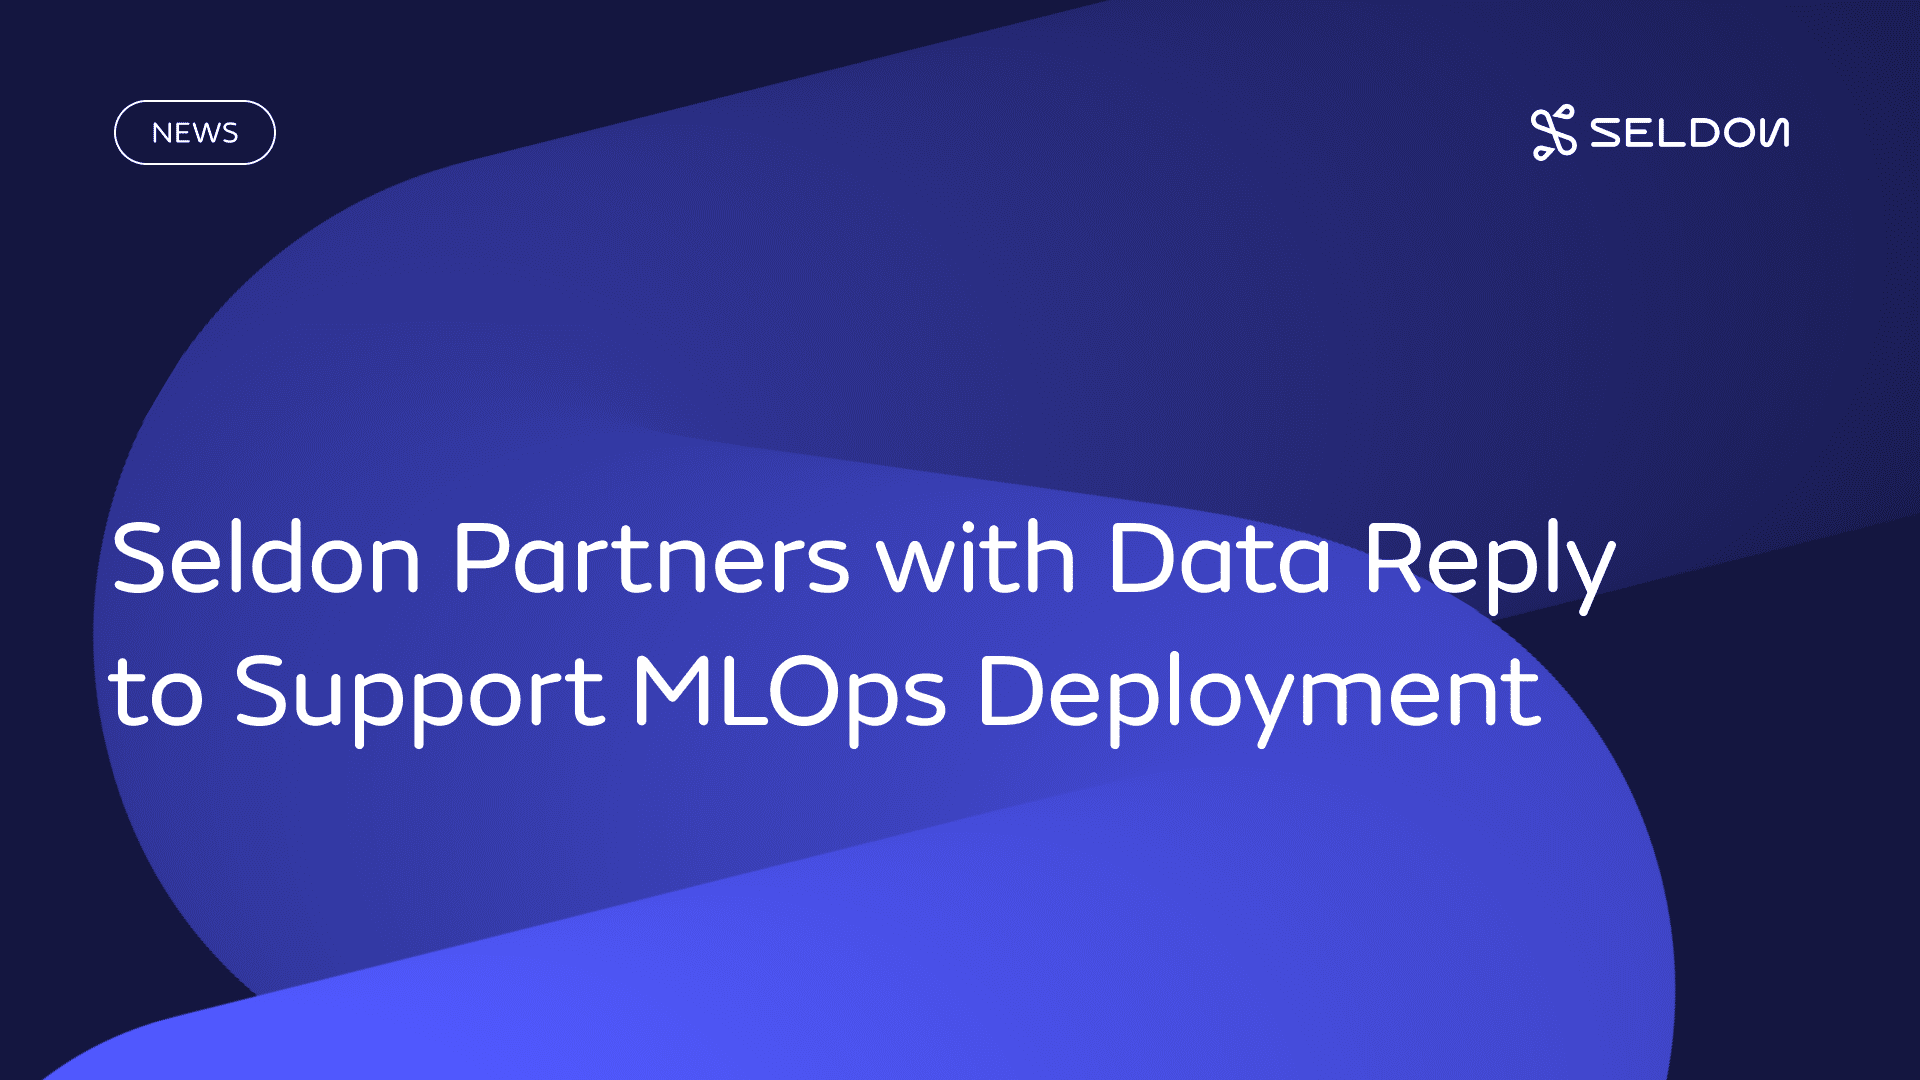 Seldon partners with advanced analytics company Data Reply to support MLOps deployment